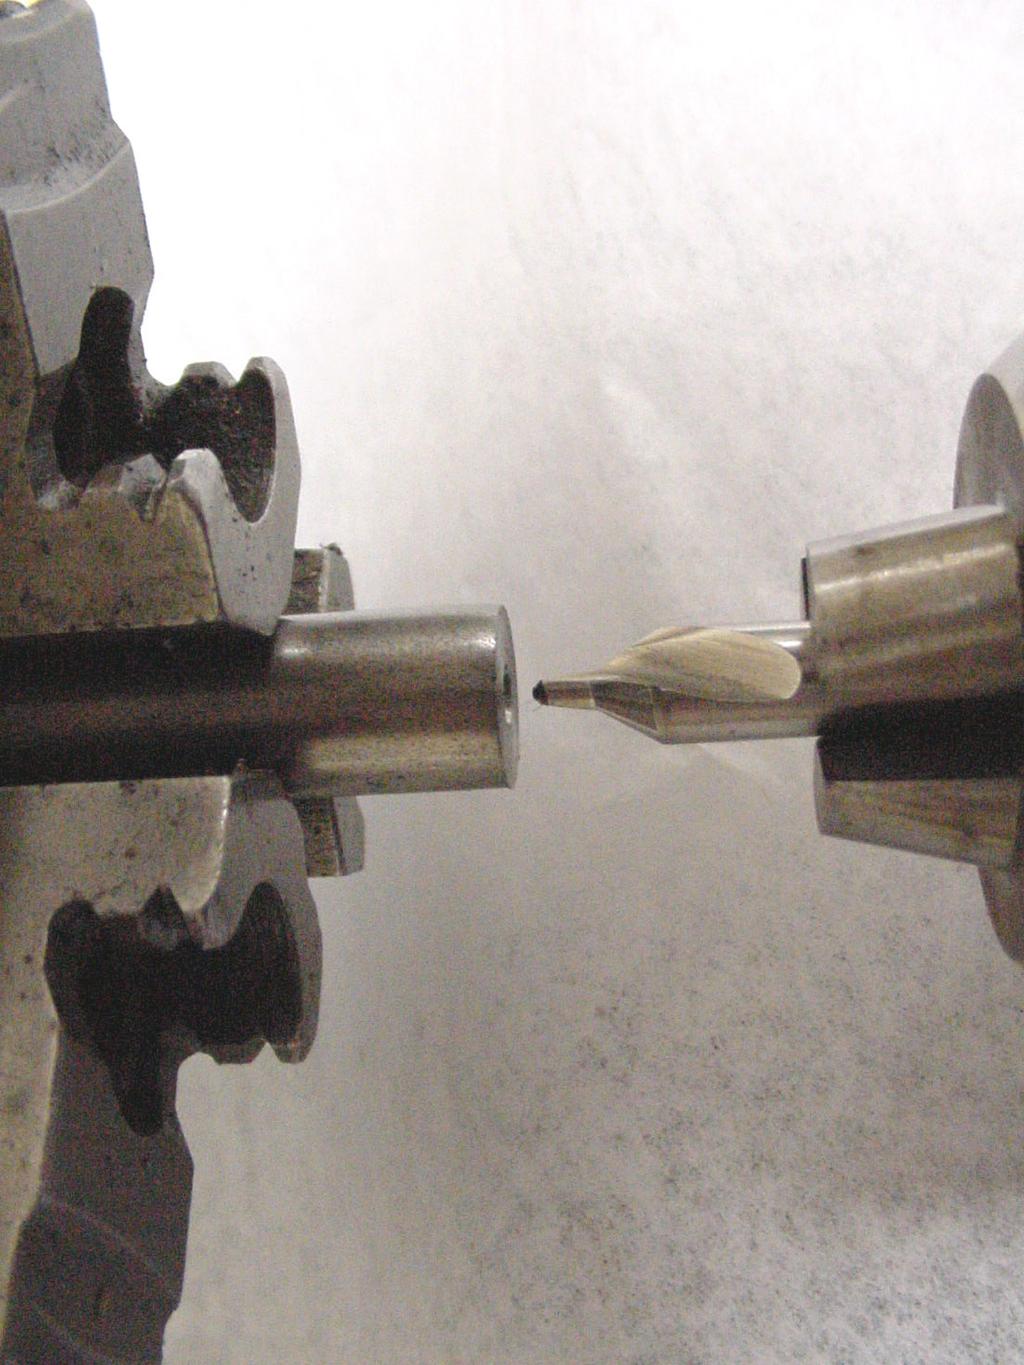 Centerdrill/Countersink: Centerdrill/Countersinks serve three purposes: The cylindrical center-point is used to create a pilot for drilling holes, the tapered